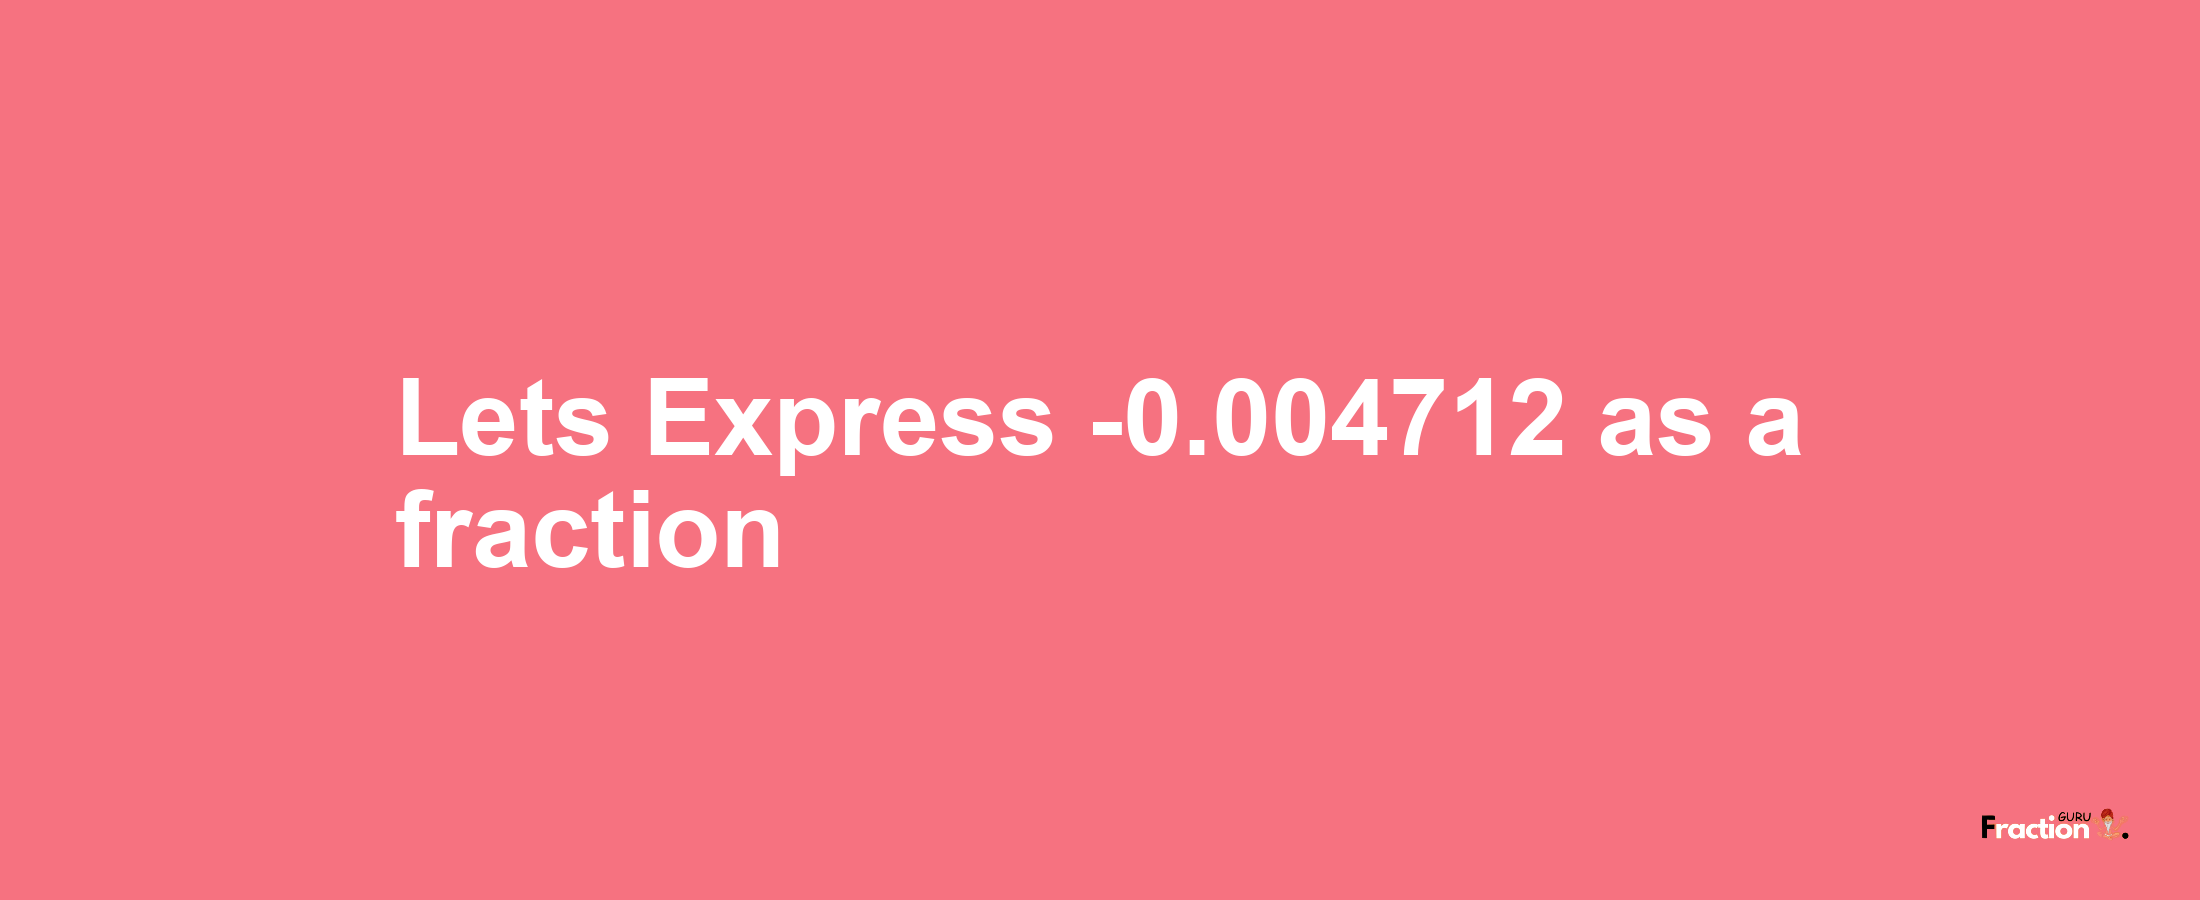 Lets Express -0.004712 as afraction